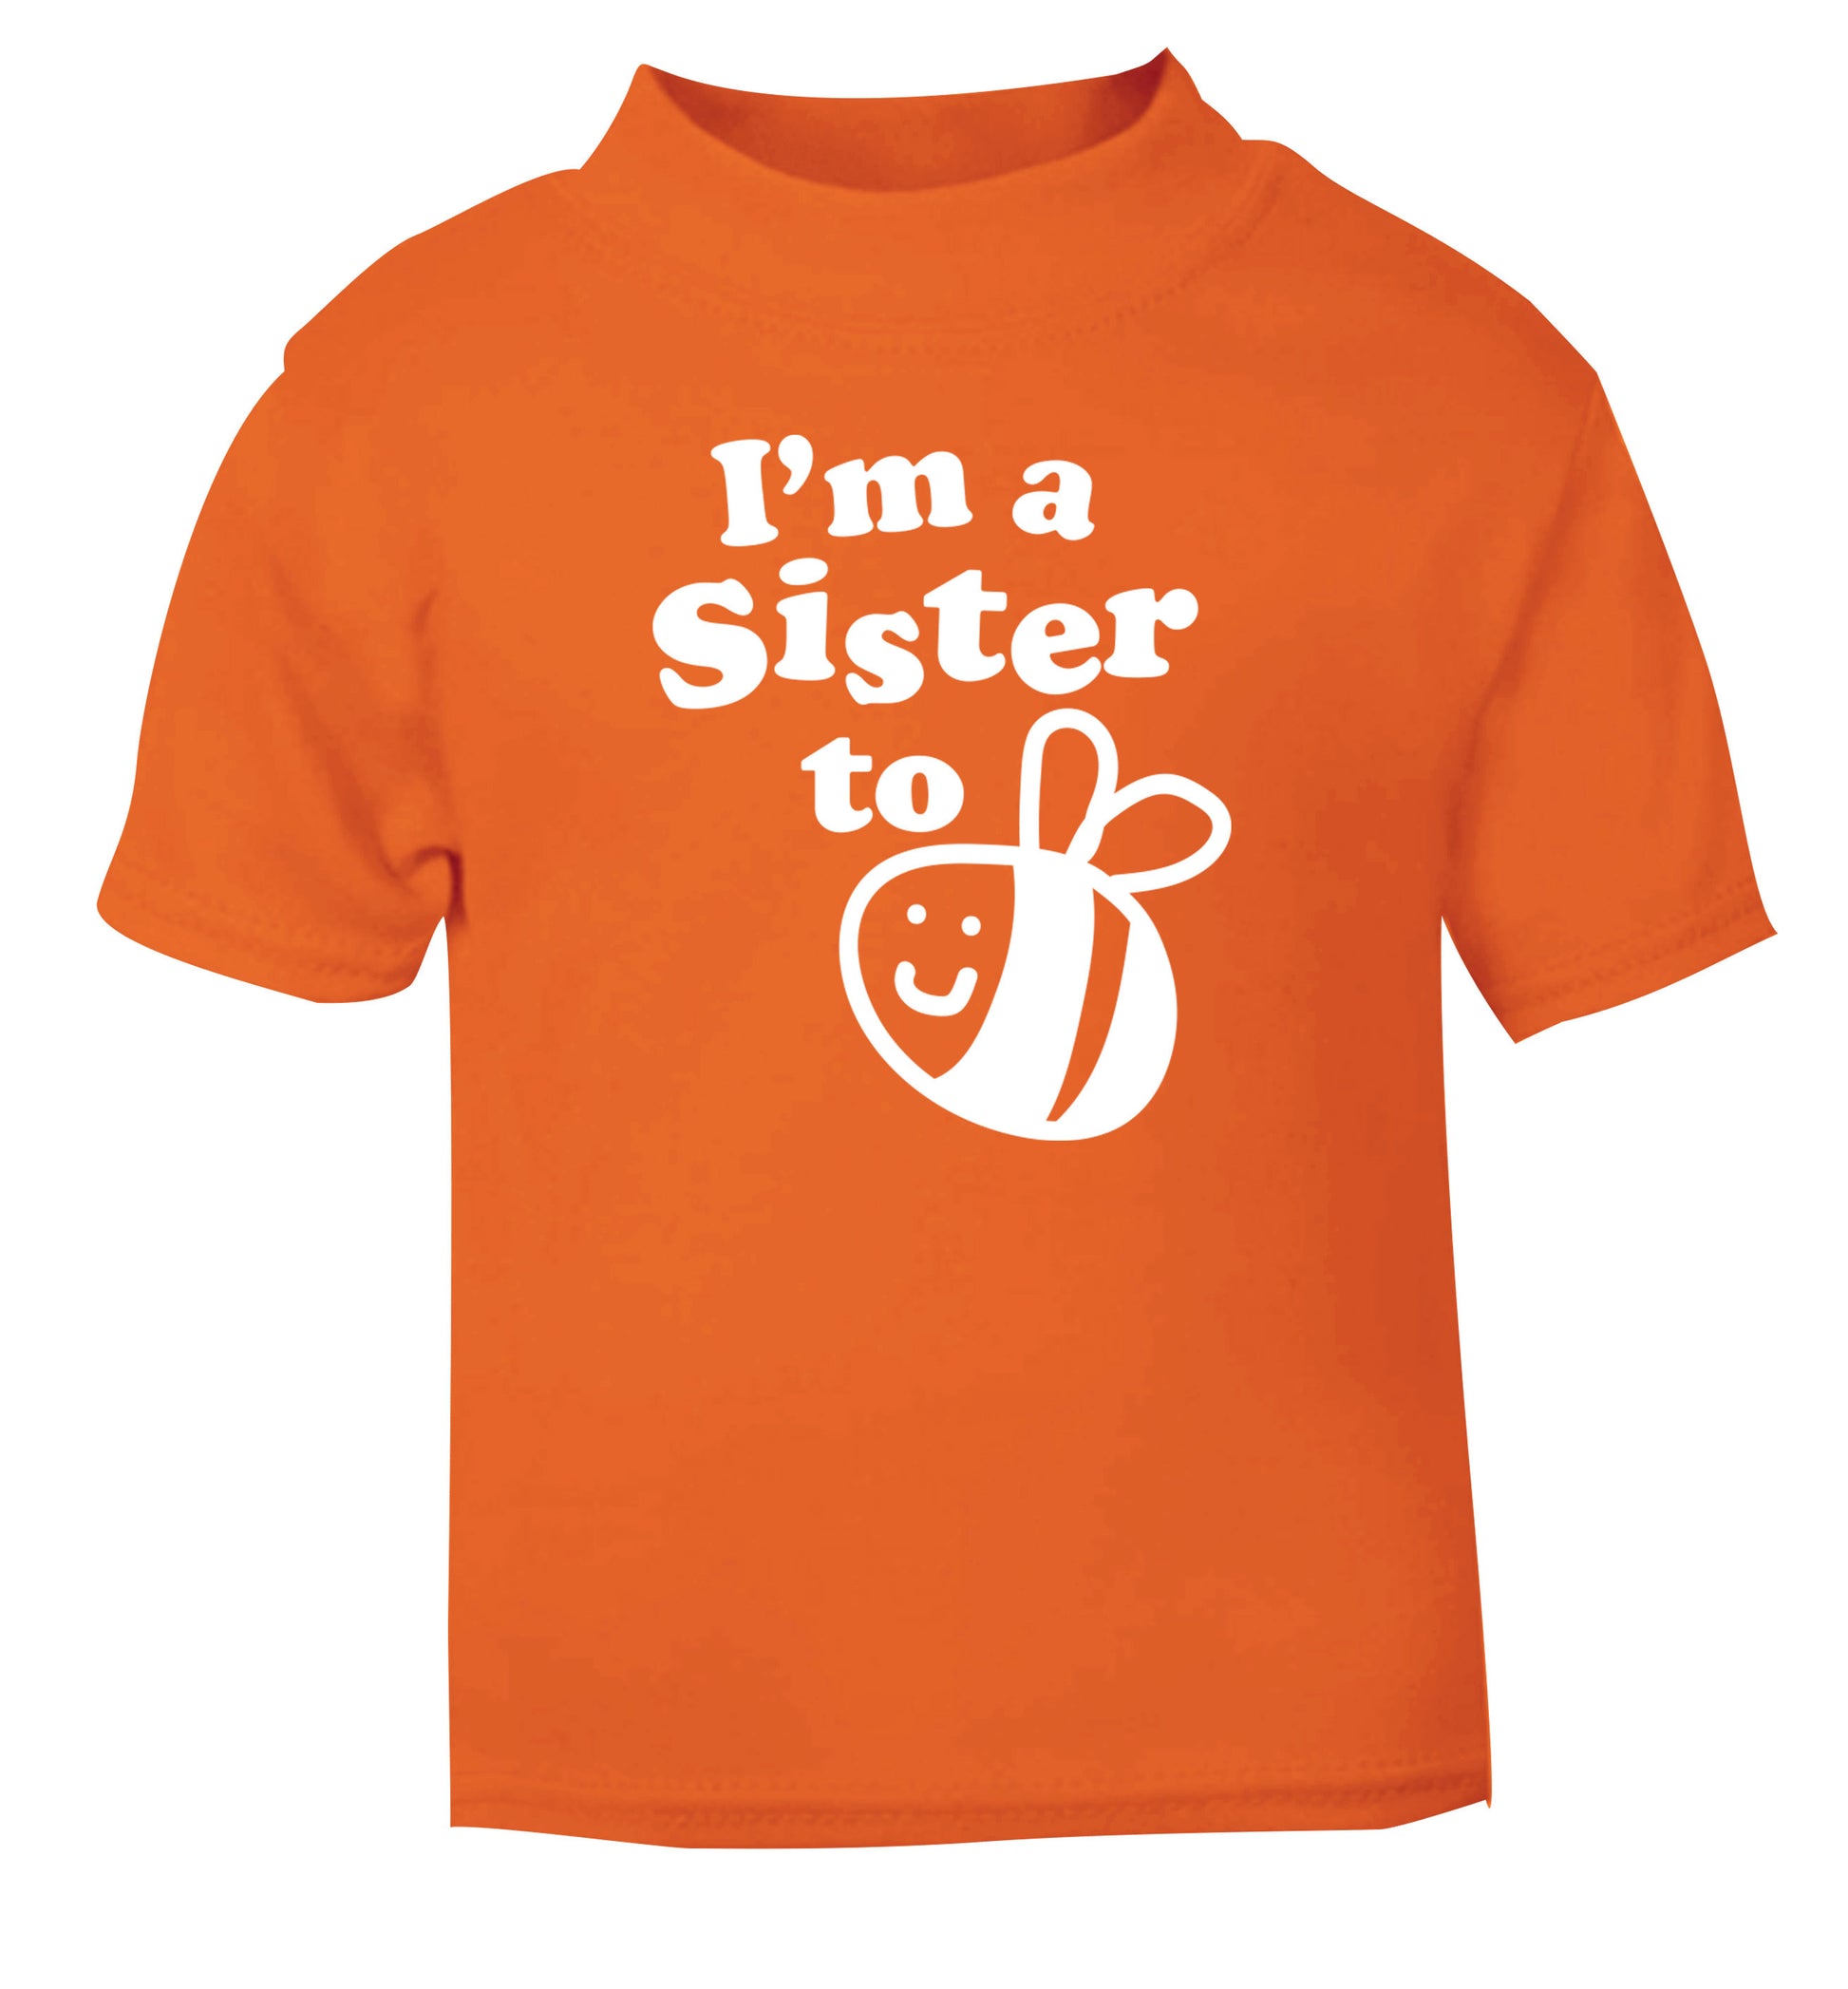 I'm a sister to be orange Baby Toddler Tshirt 2 Years